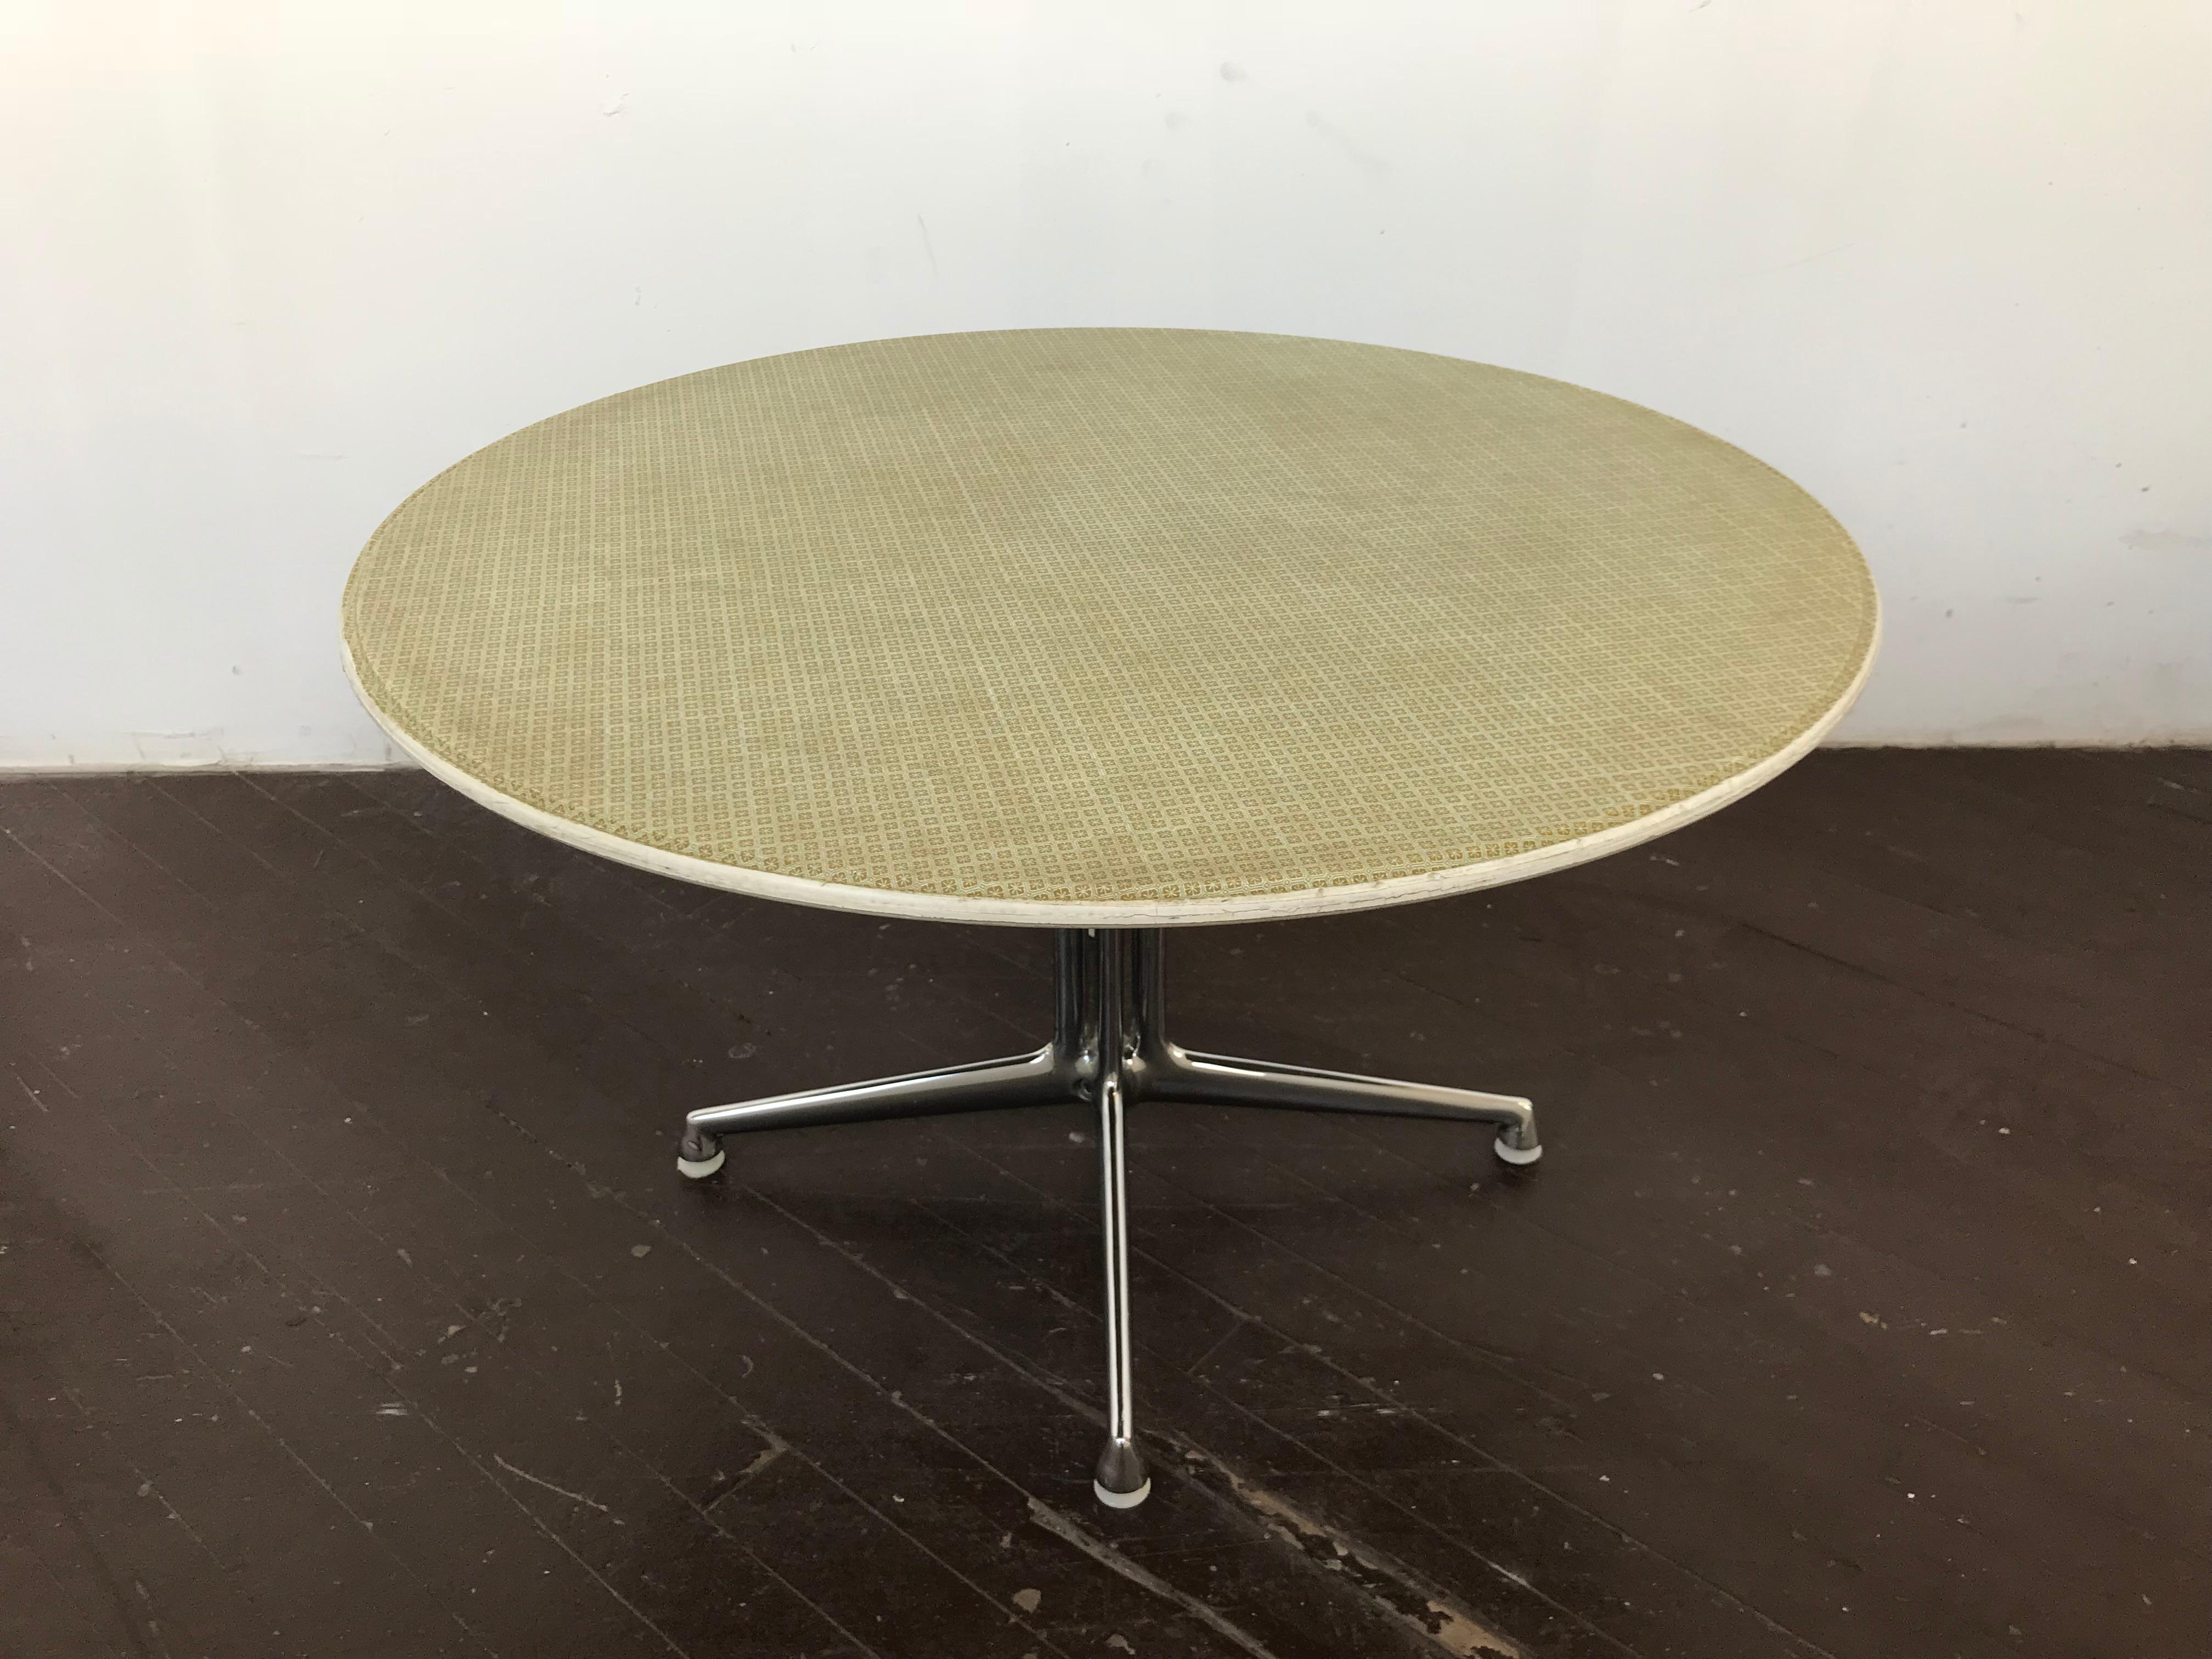 Mid-Century Modern Coffee Table by Alexander Girard & Charles Eames for La Fonda NYC 1960 For Sale